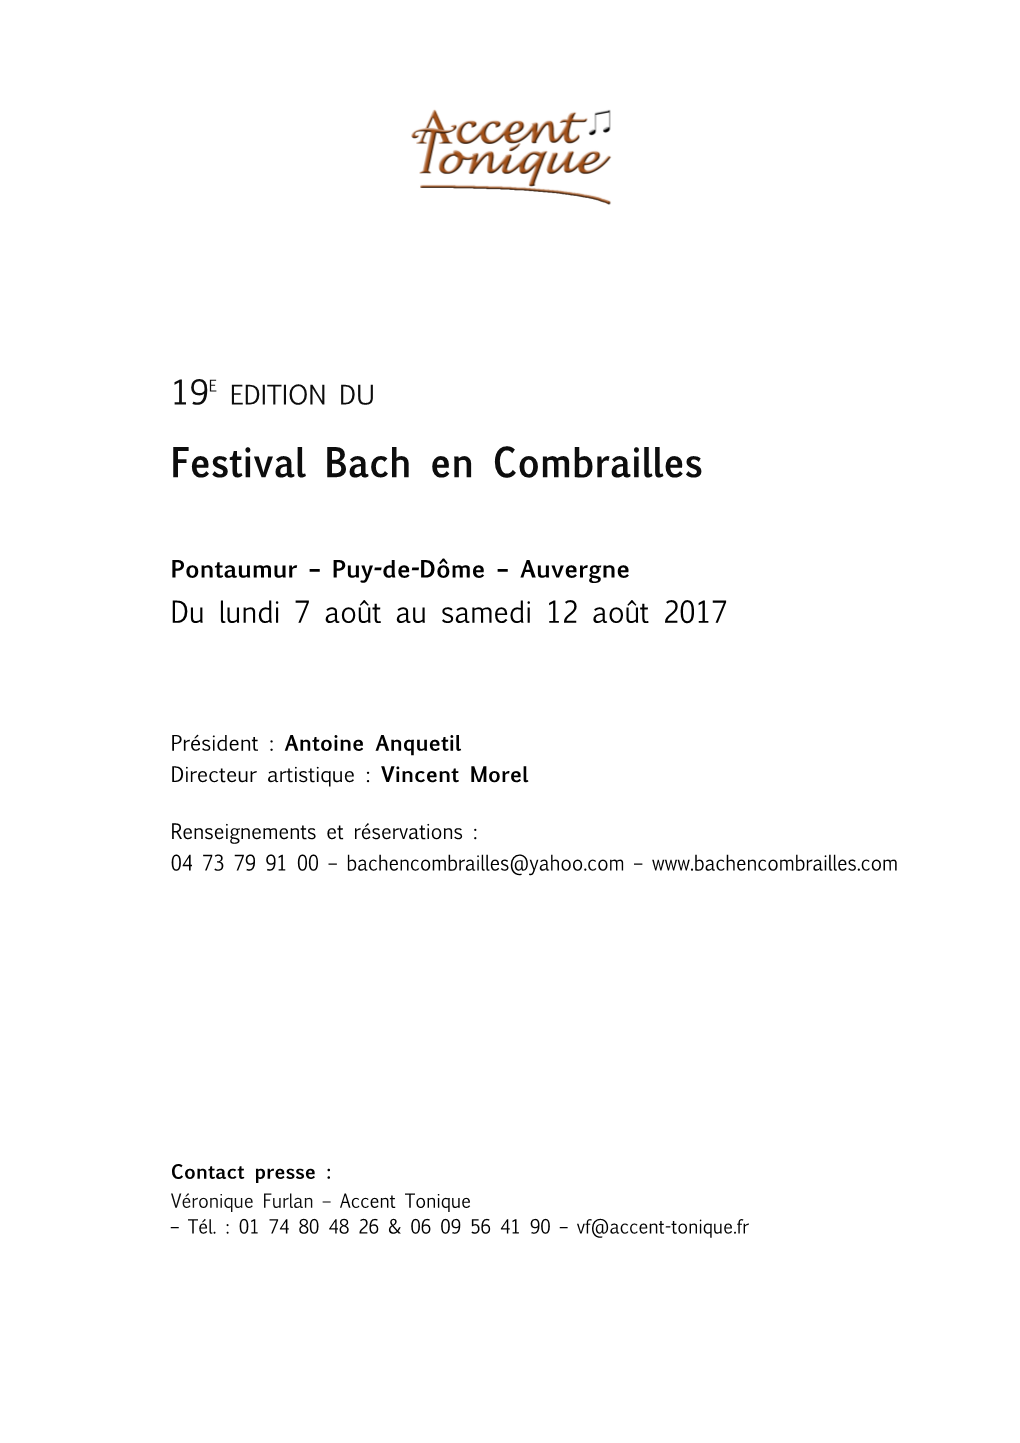 Bach Combrailles DP5 2017 Ultimes Corrections Antdanvin